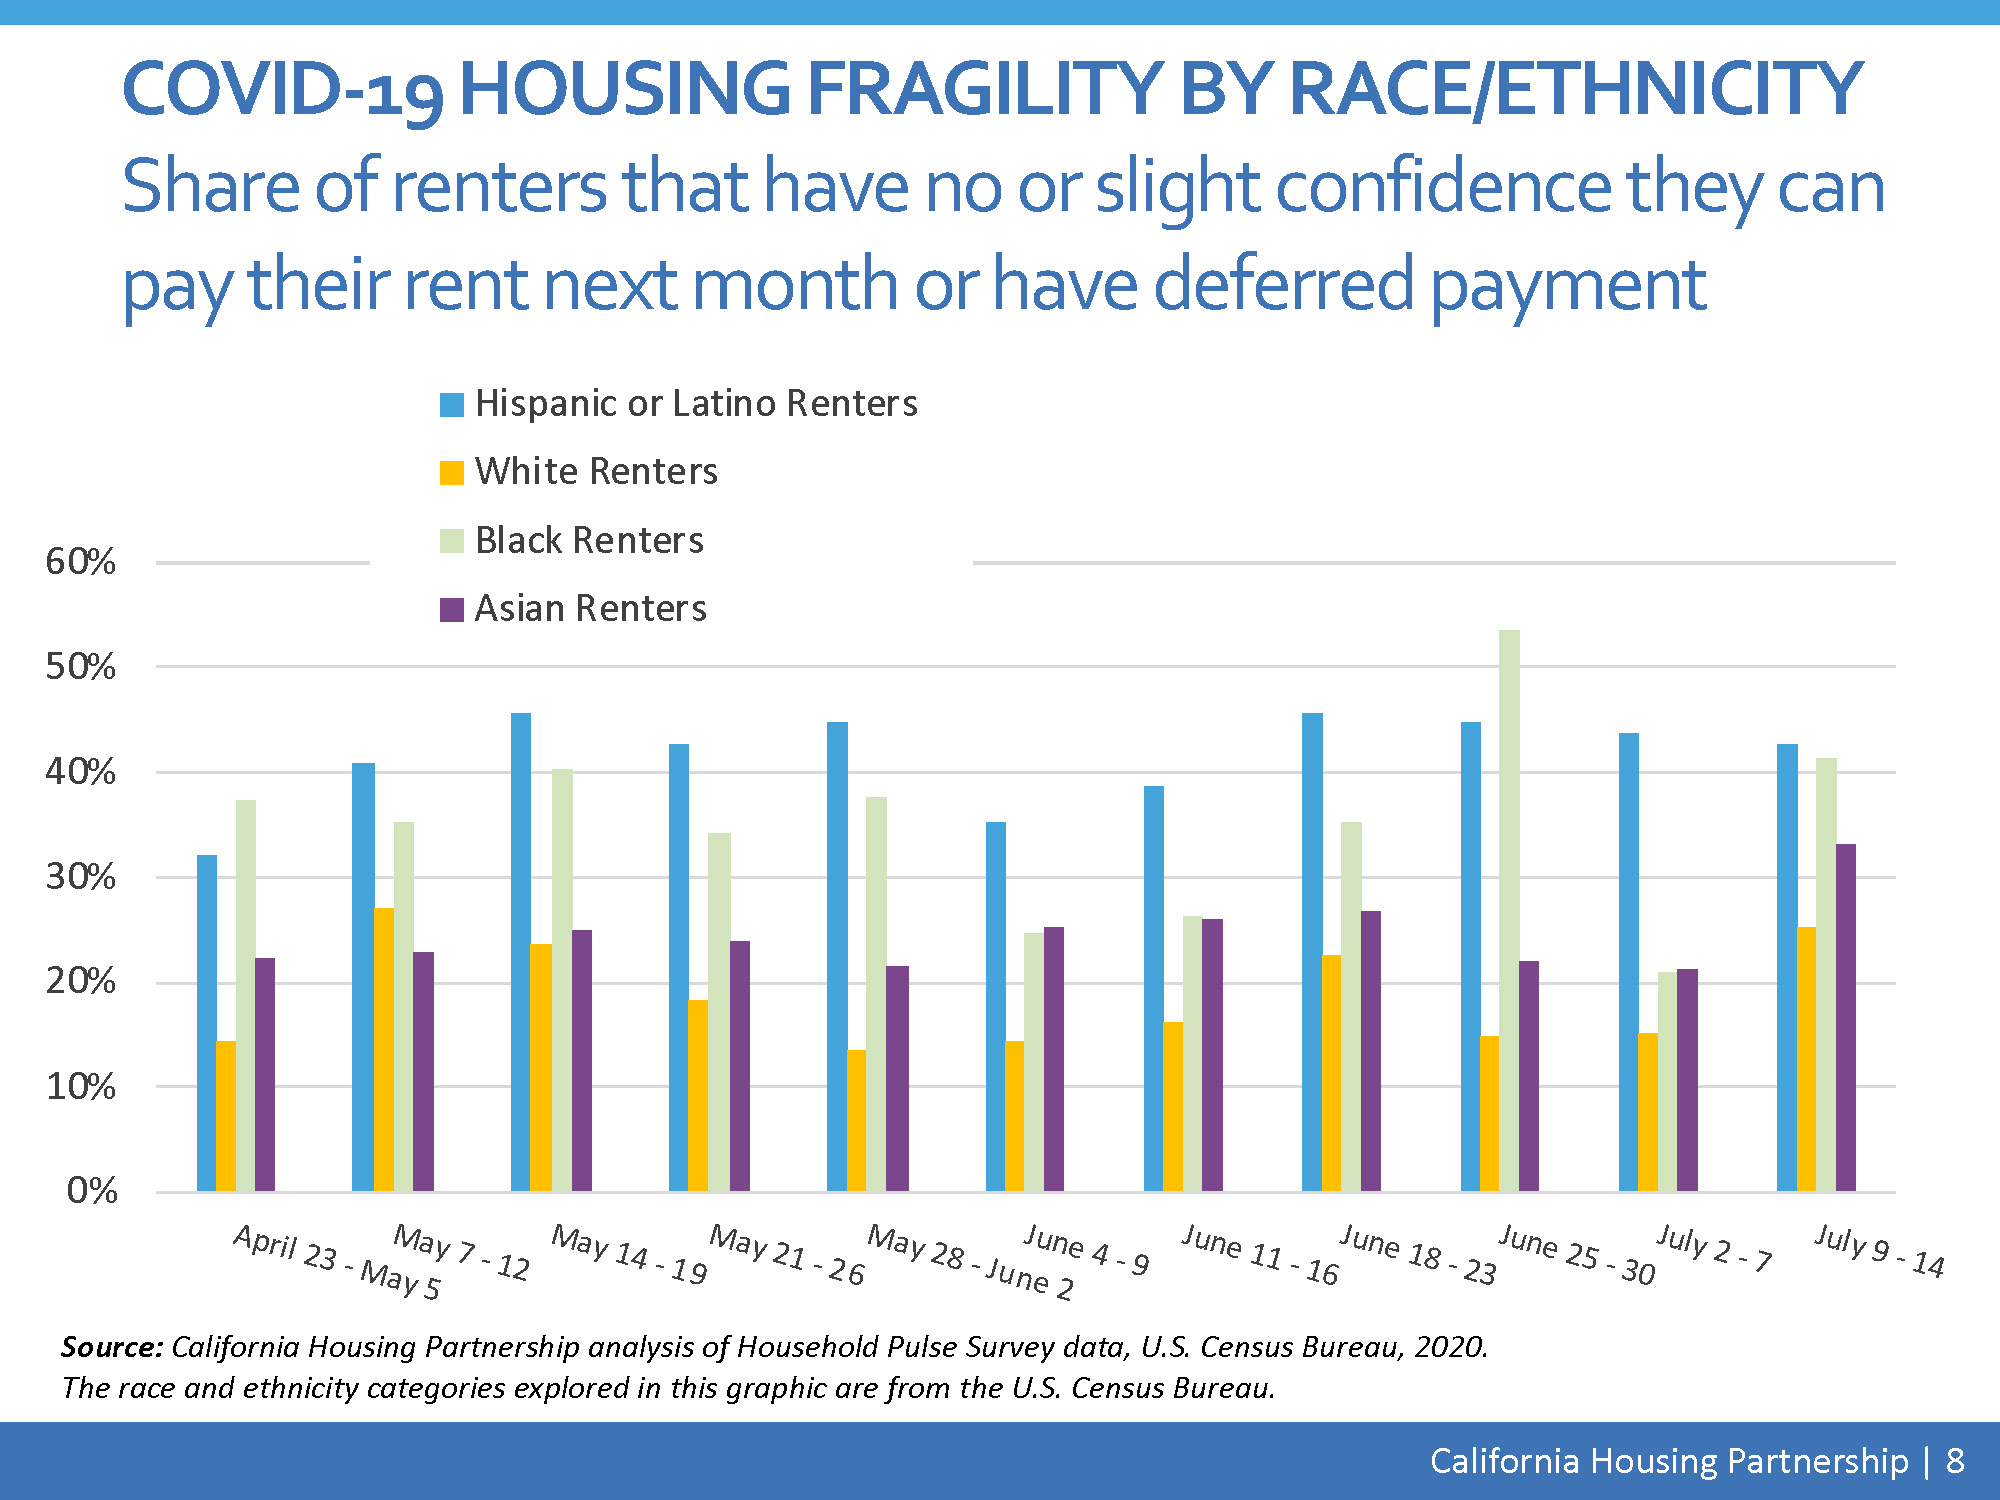 COVID-19 Housing Fragility by Race/Ethnicity